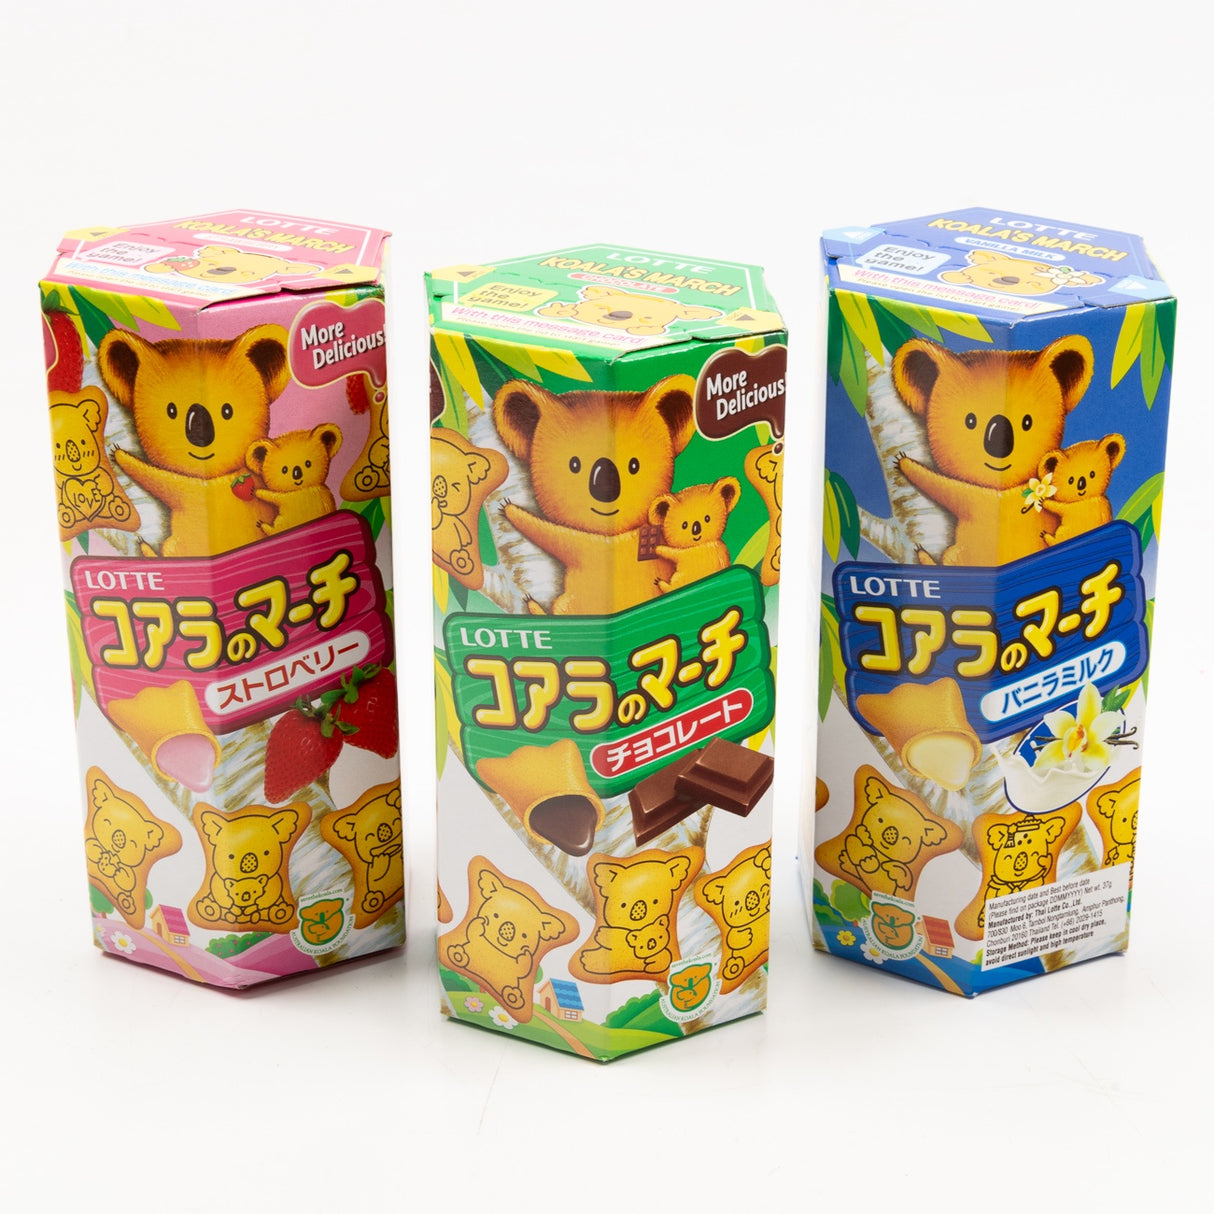 koala, march, biscuits, japanese